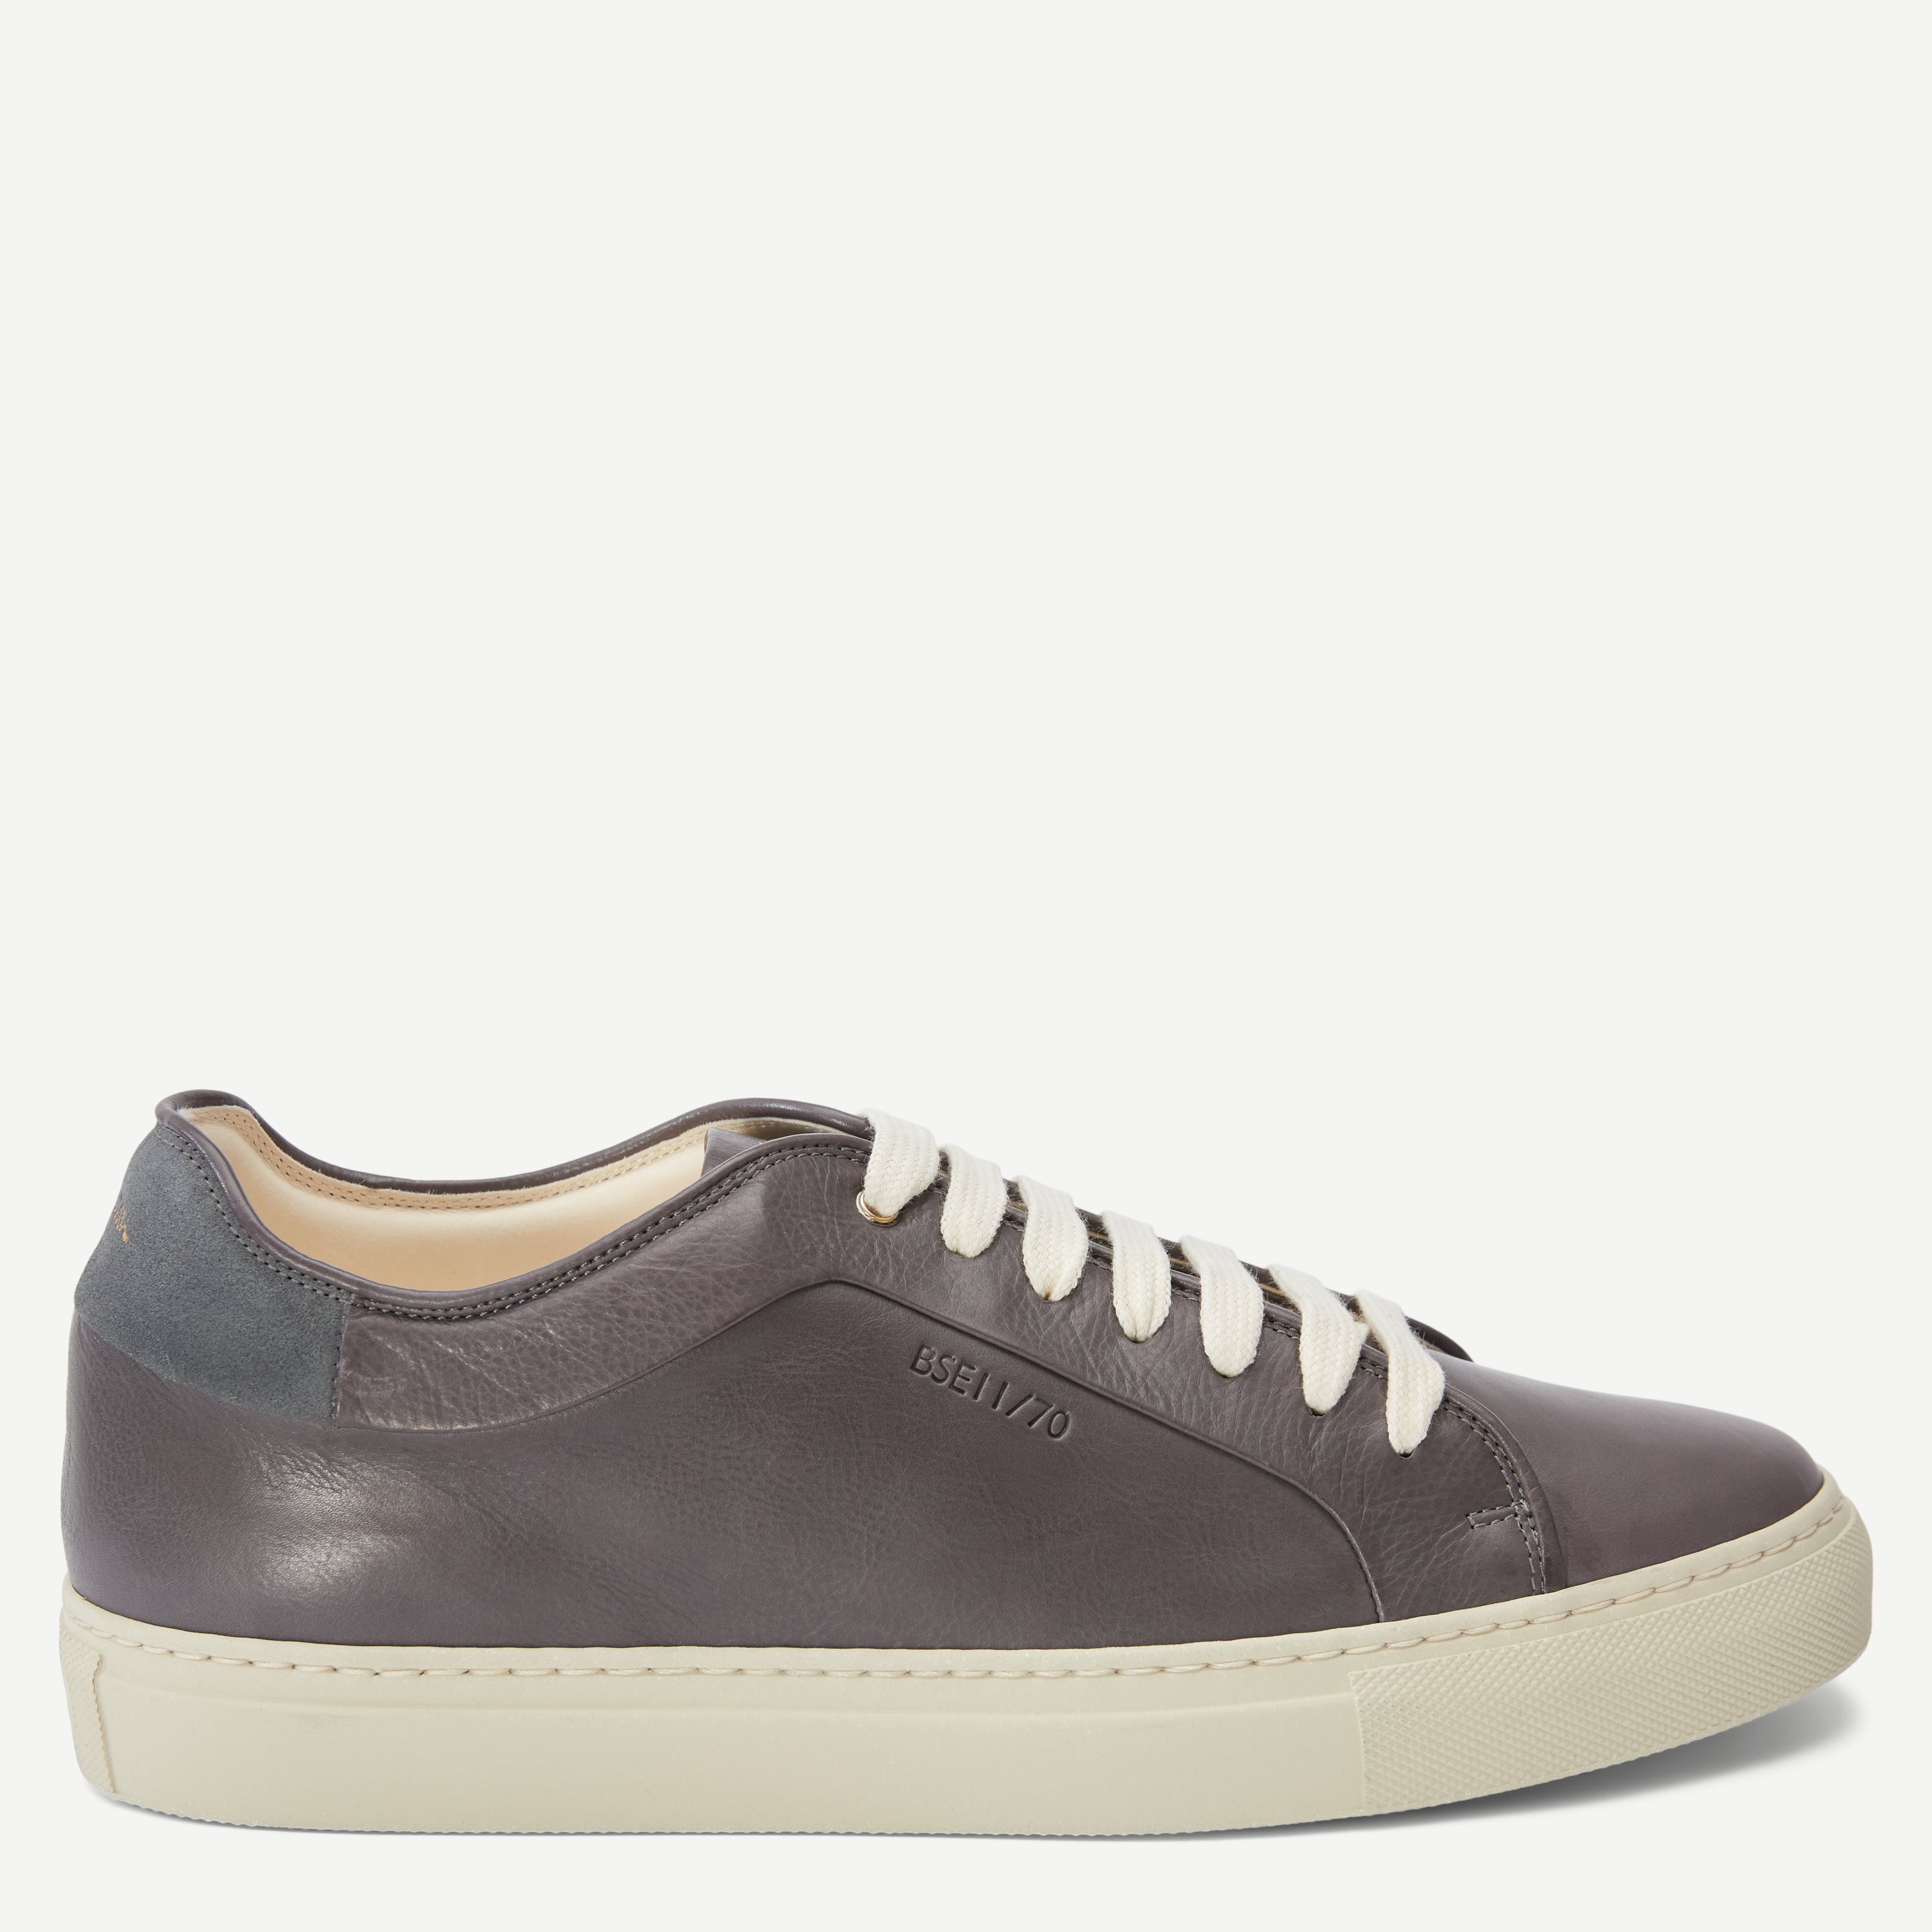 Paul Smith Shoes Shoes BSE11-JECO Grey